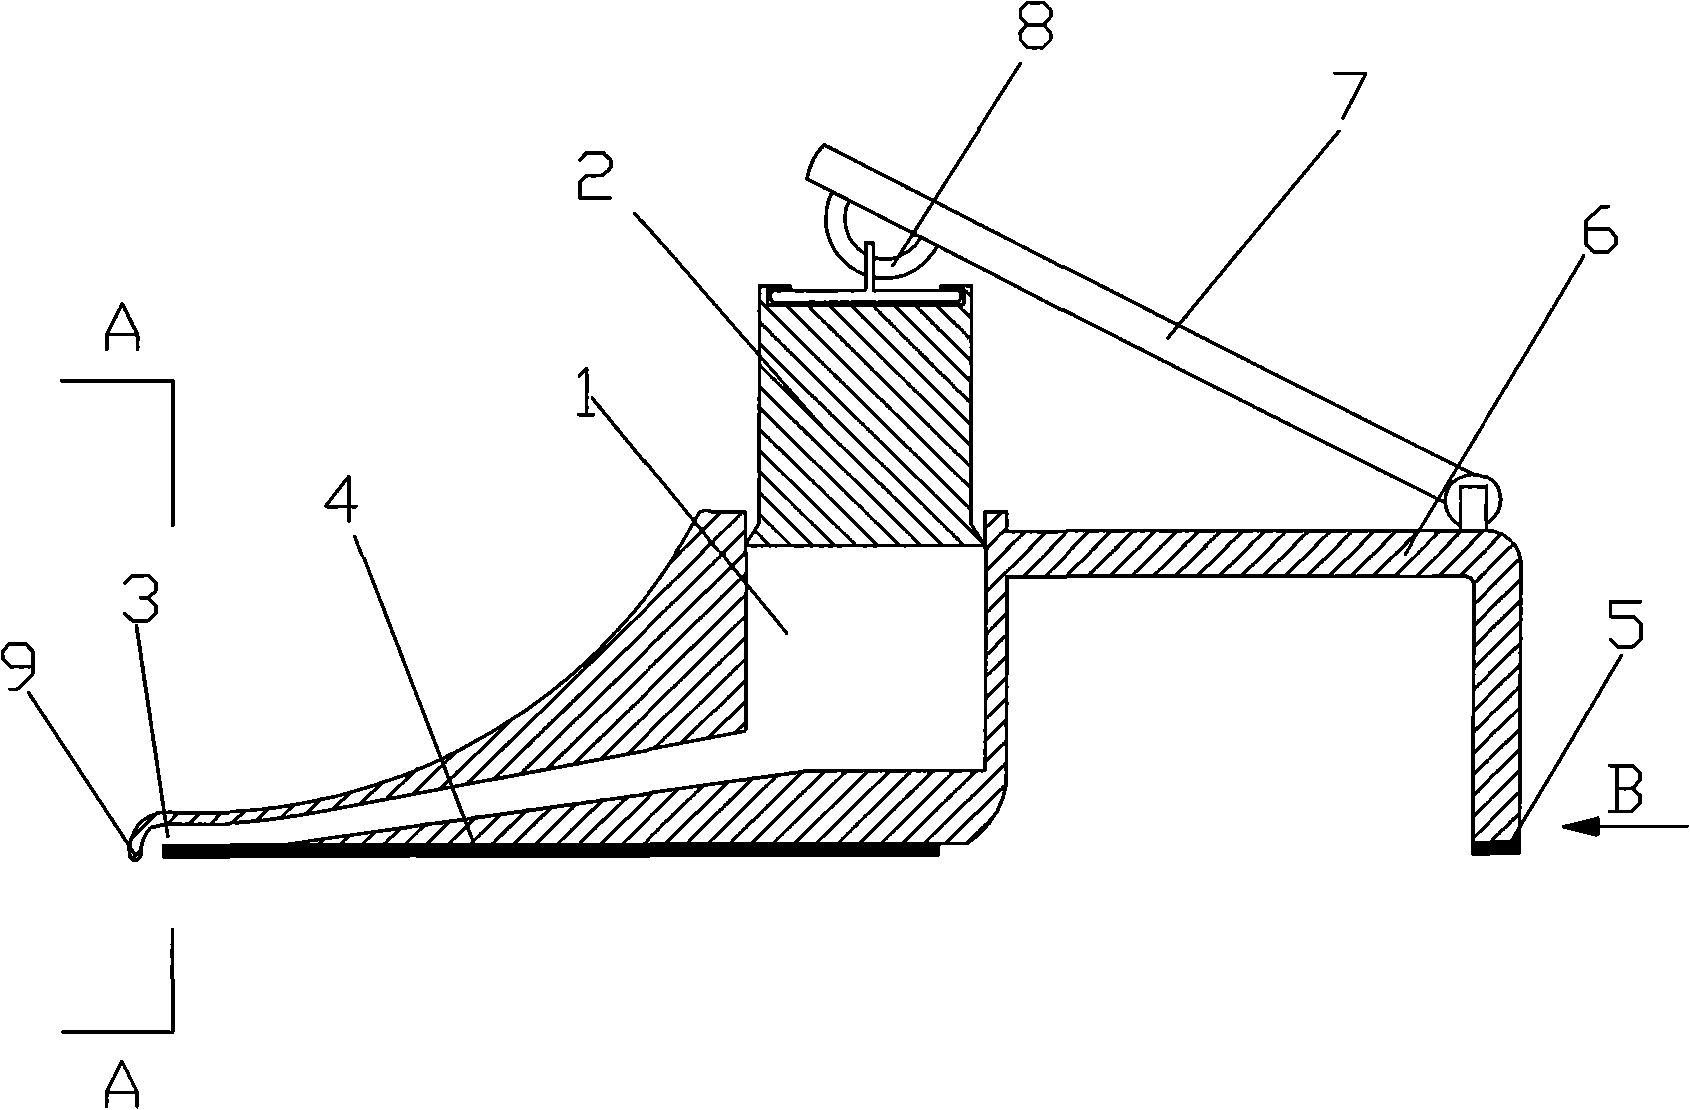 Tile pointing device